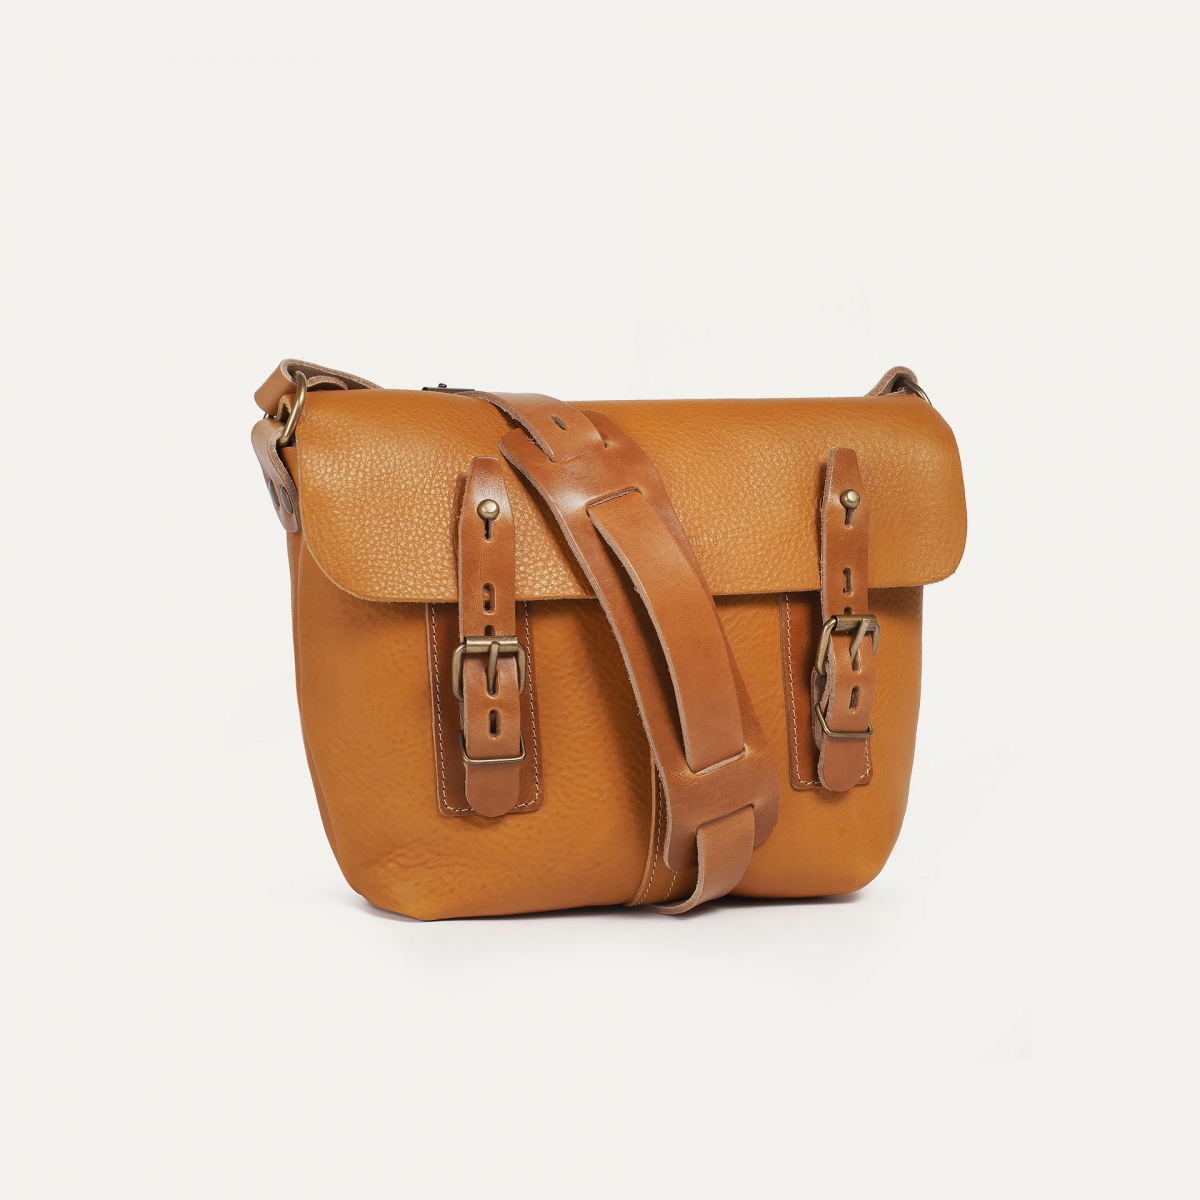 Louis satchel bag I Leather Bags for Men & Women, Made in France